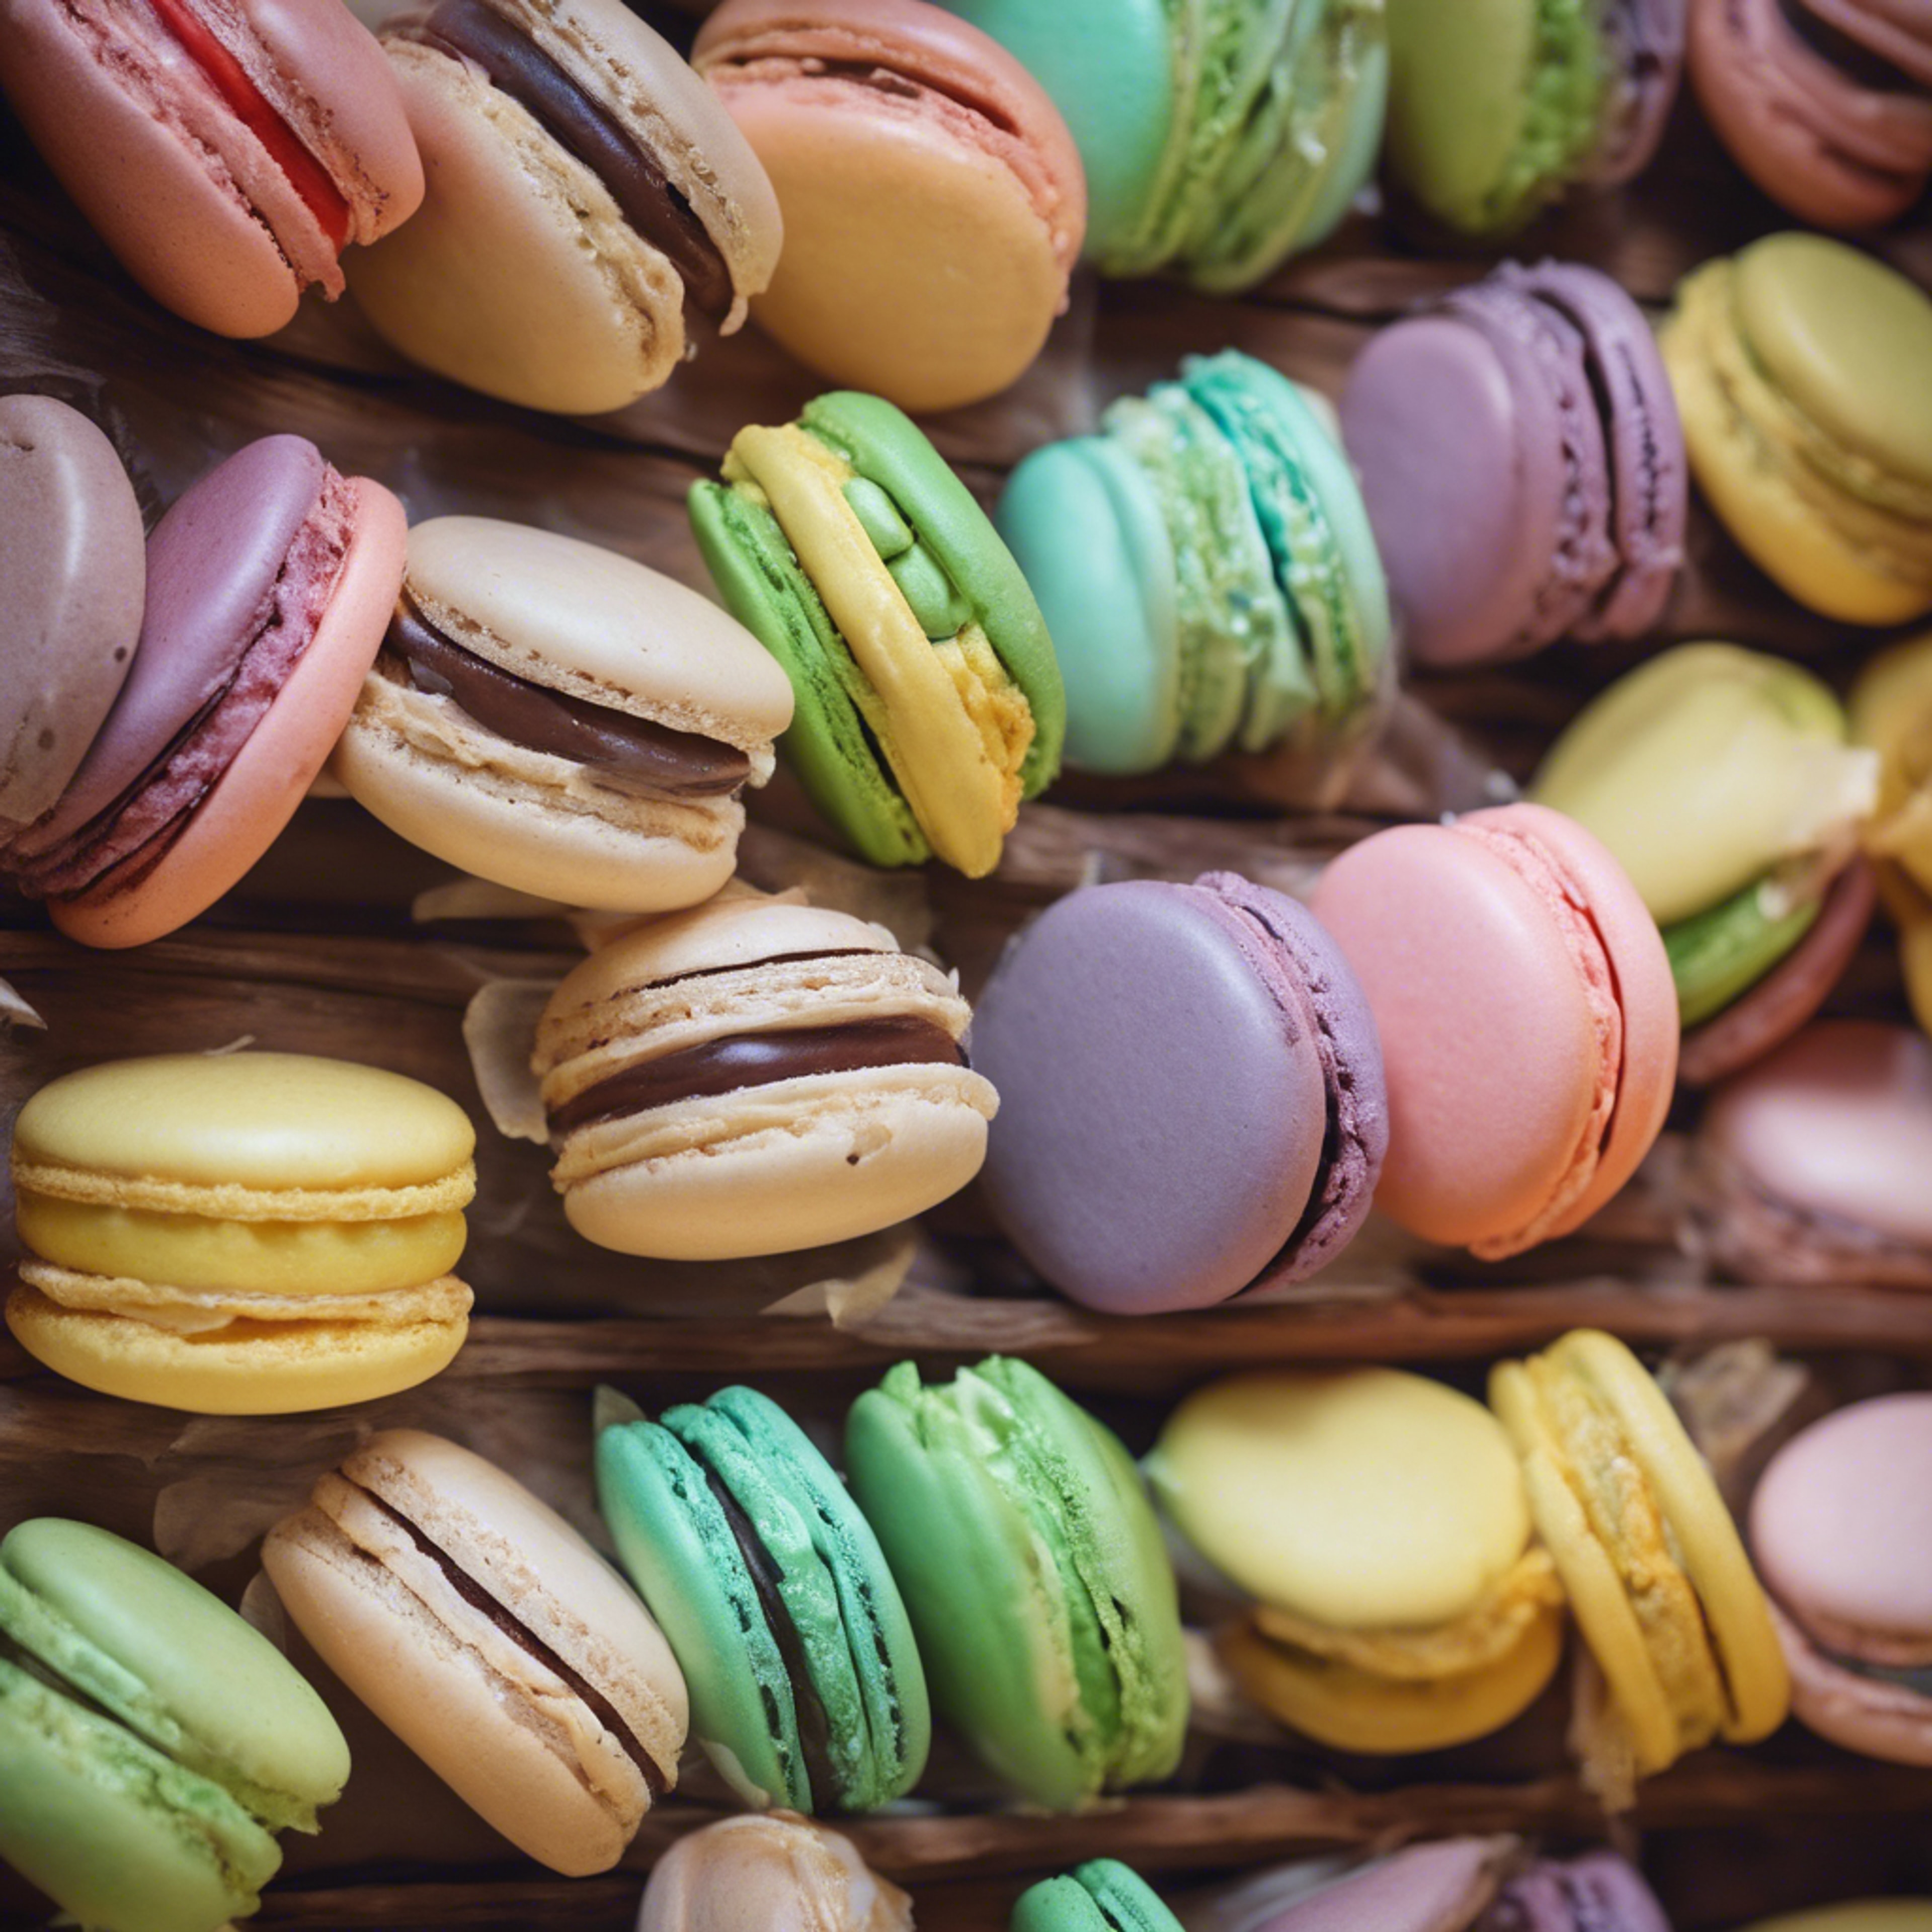 An old-fashioned nostalgic bakery displaying various colorful macarons. Tapet[50adf48075104113b6f7]